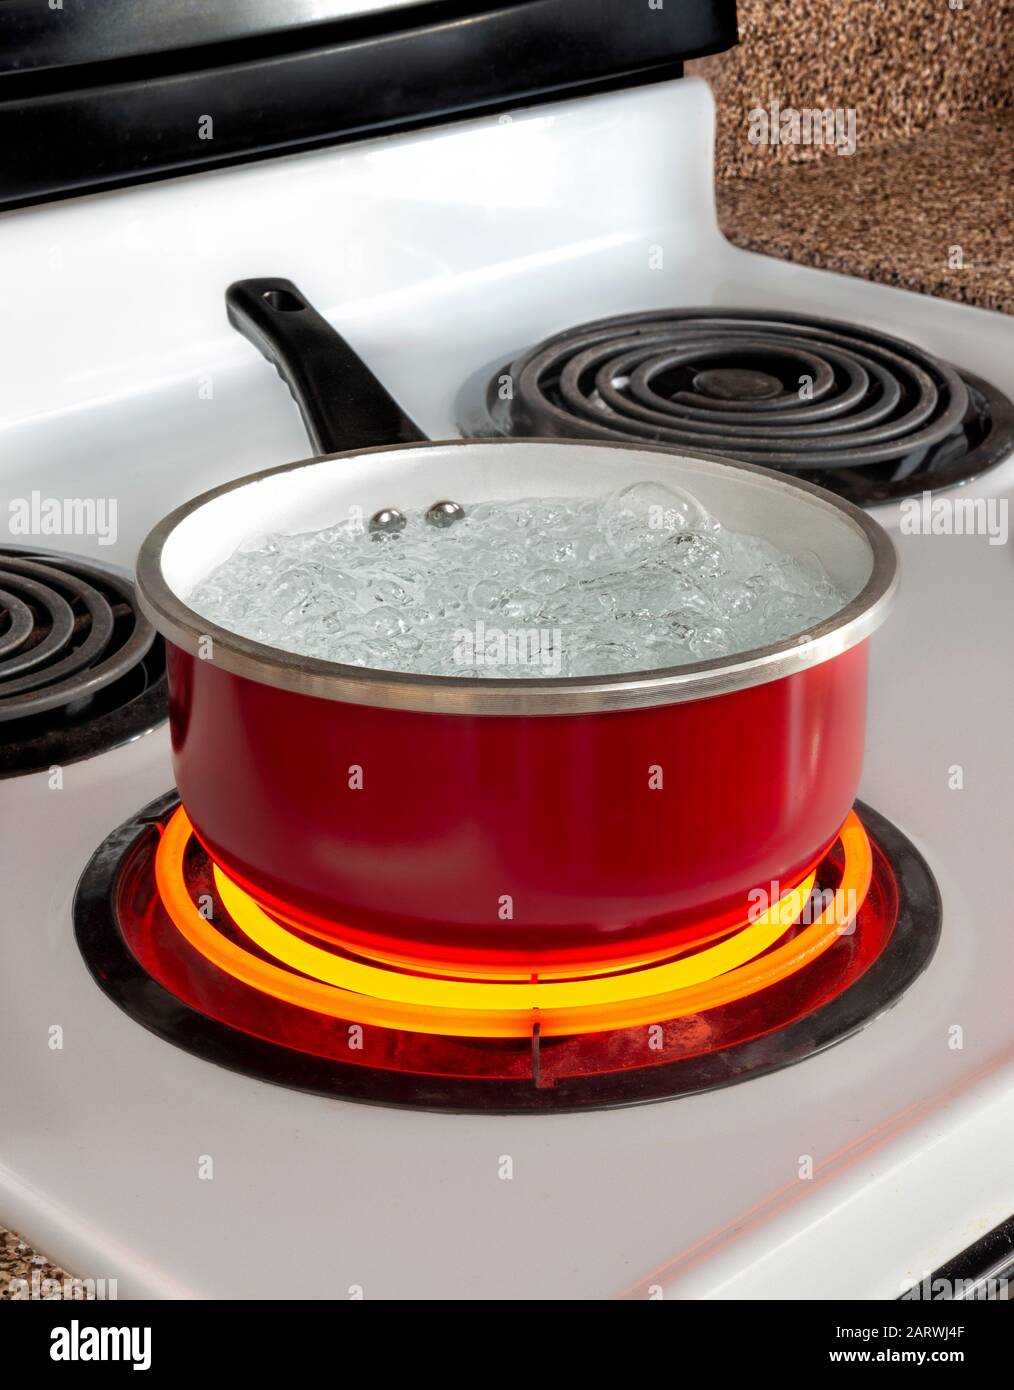 Electric stove top burner for cooking Stock Photo - Alamy